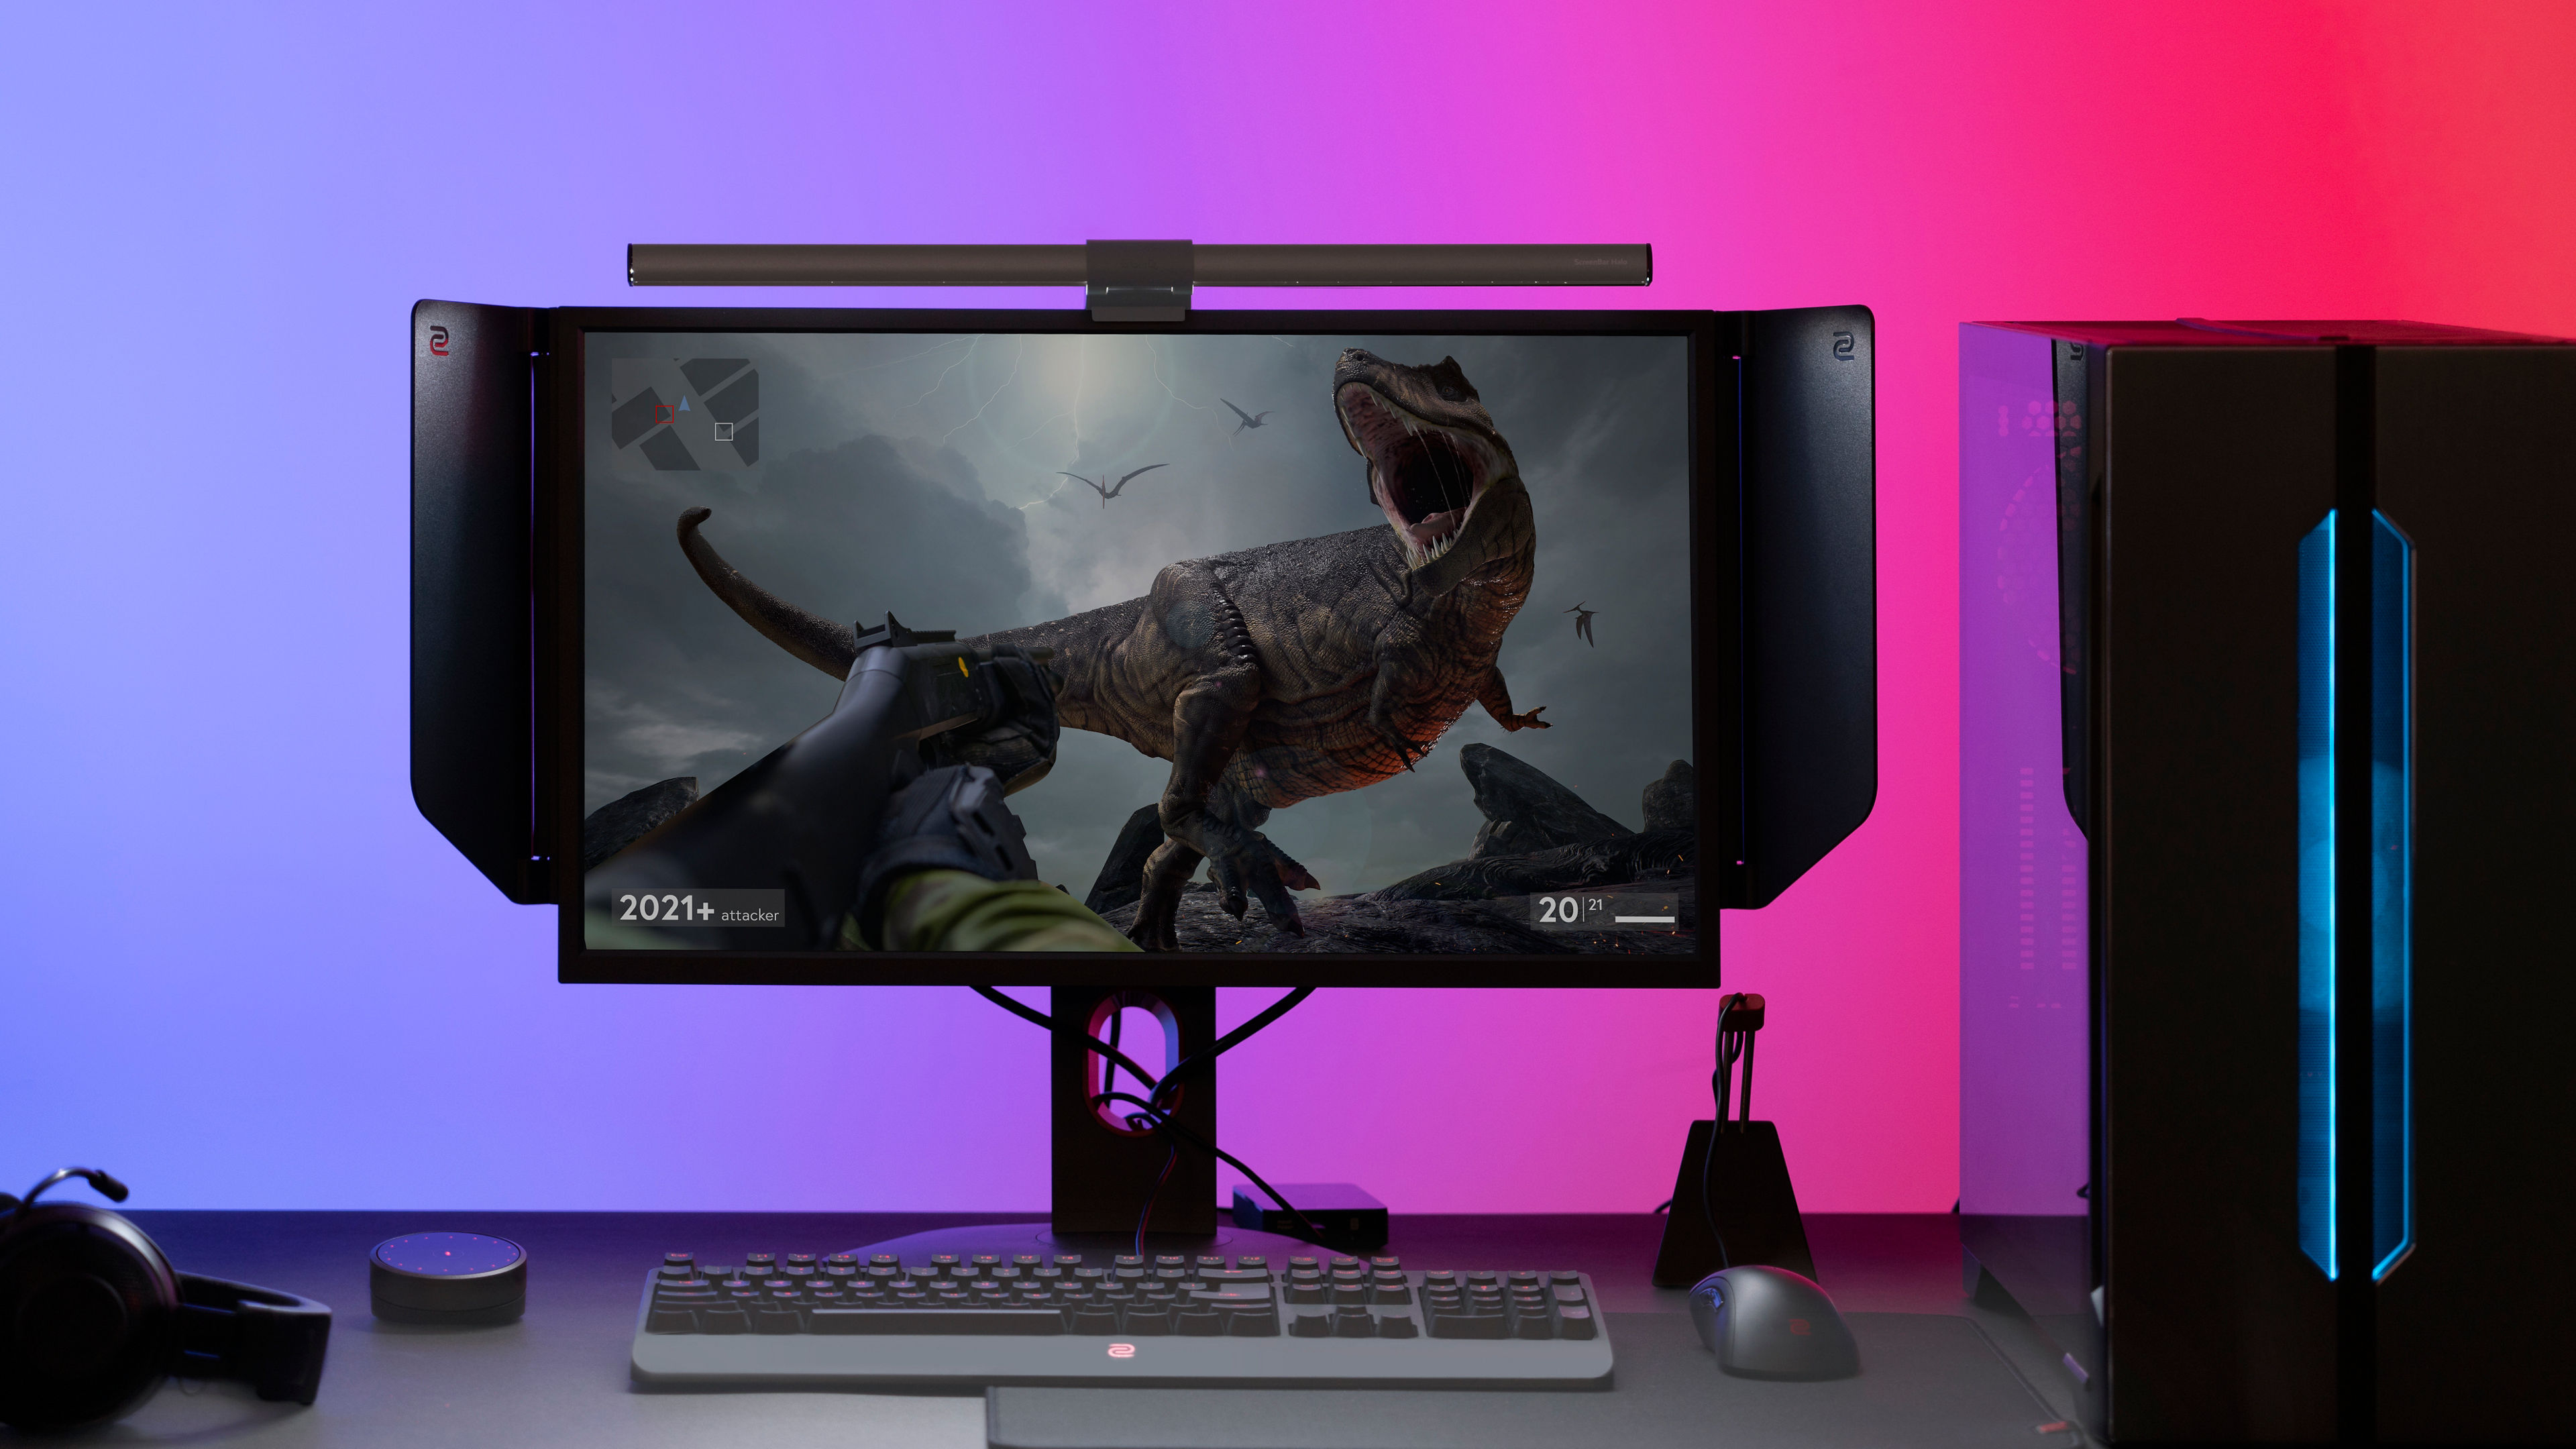 Top 10 Tech Accessories to Upgrade Your Gaming Desk Setup 